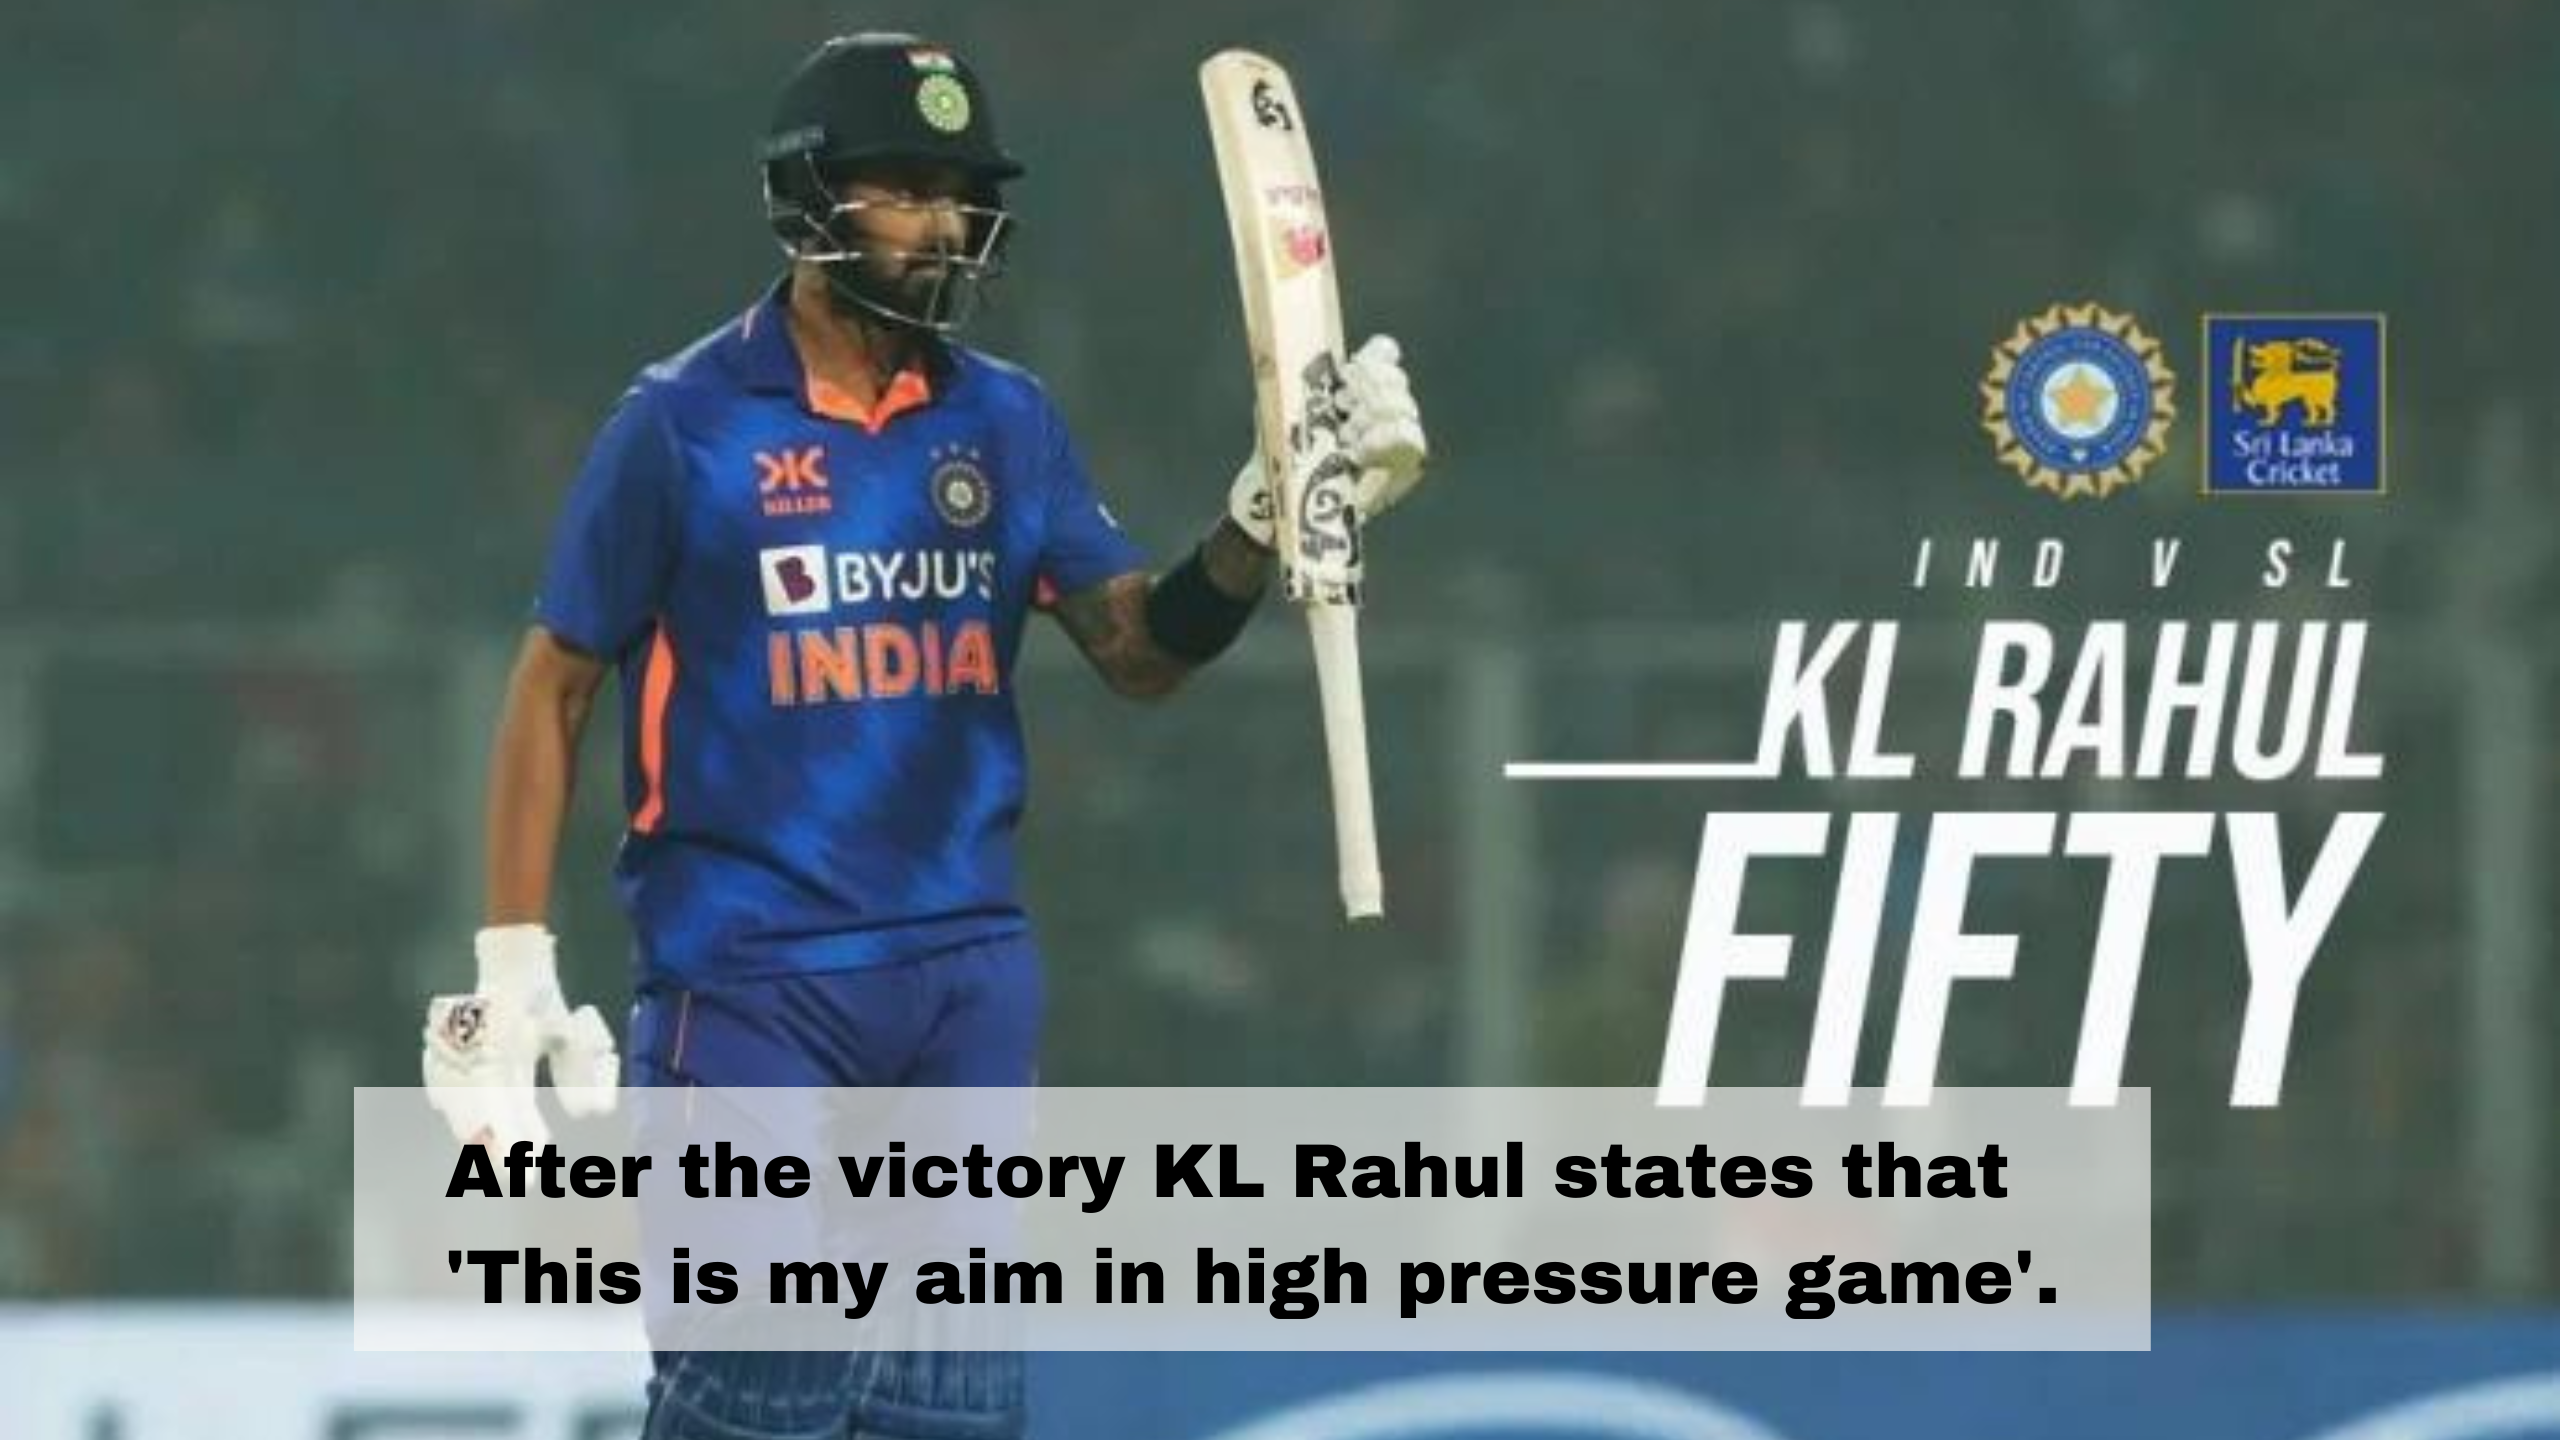 After the victory KL Rahul states that 'This is my aim in high pressure game'.